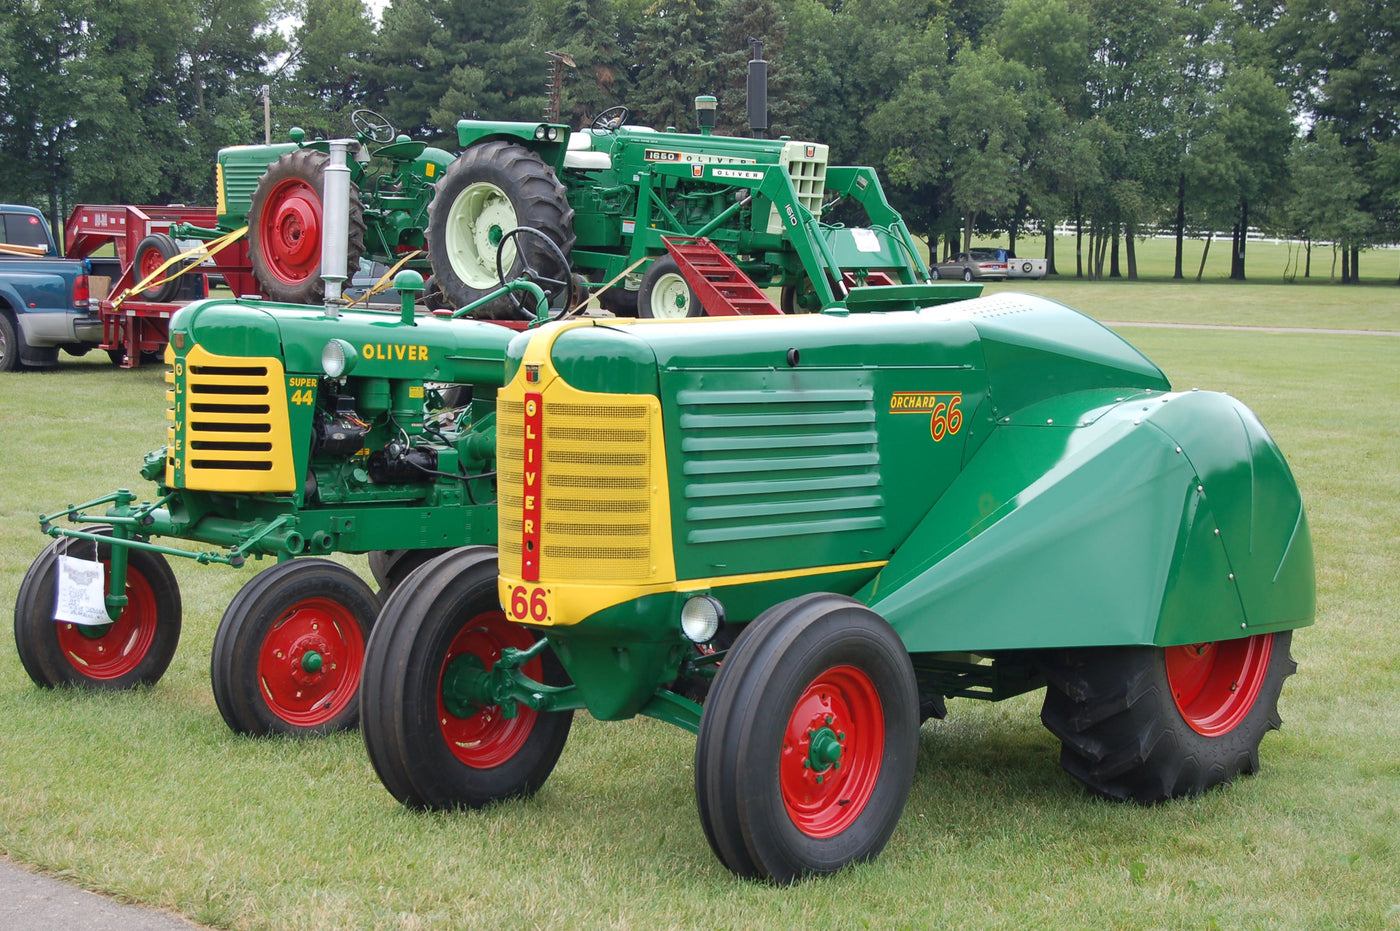 Choosing an Orchard Tractor